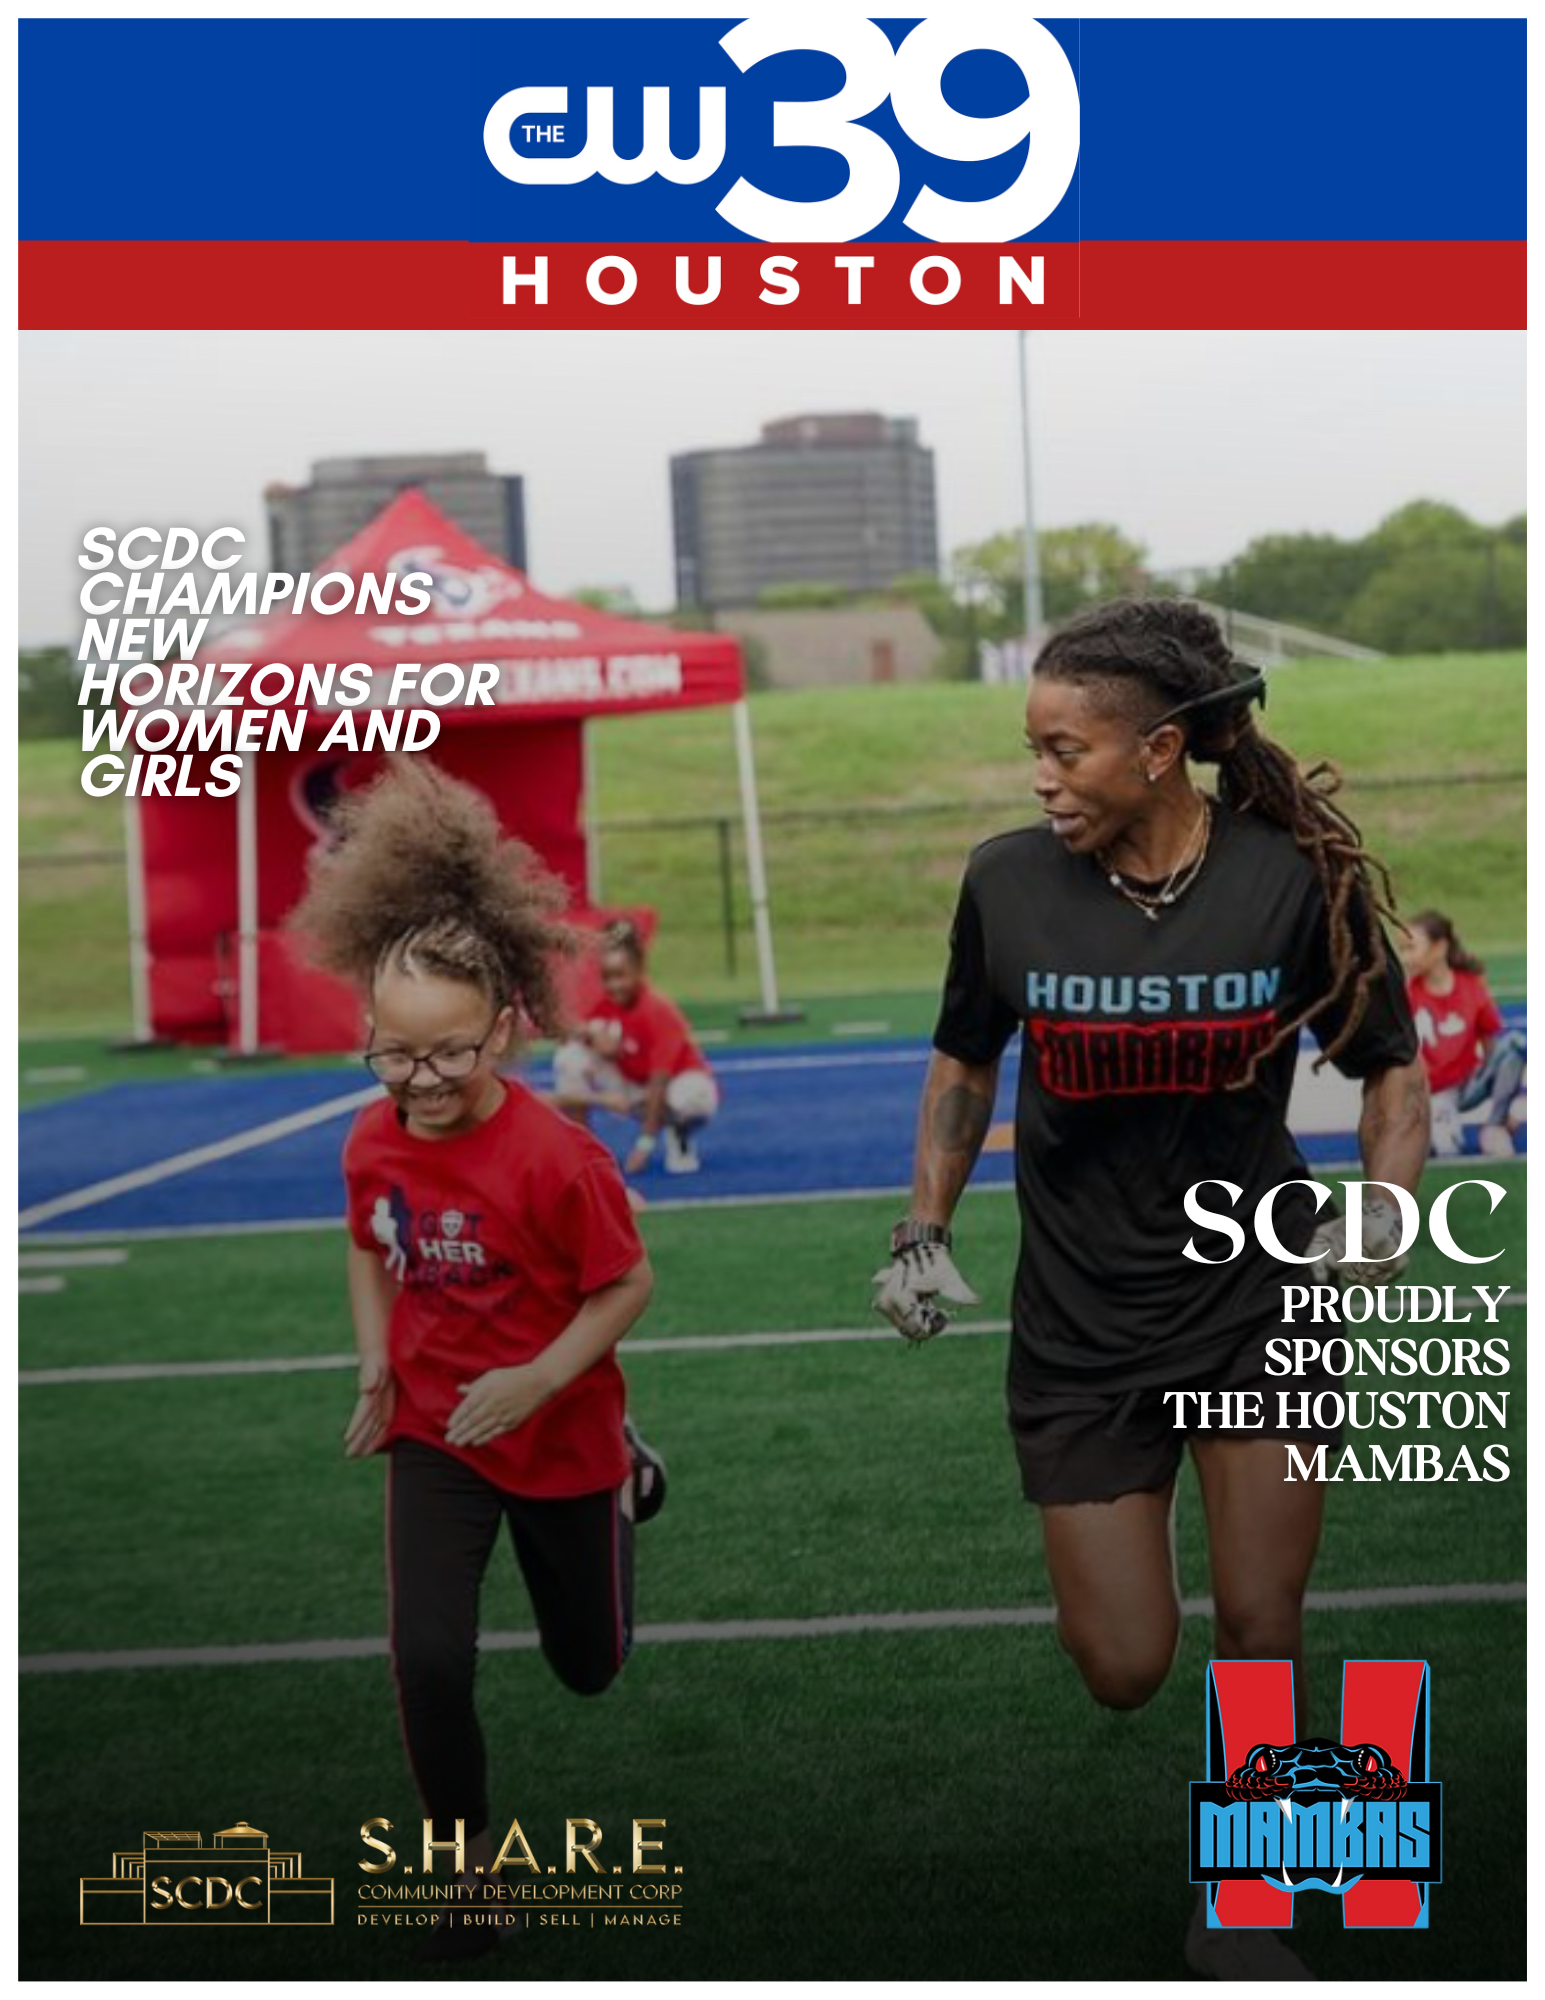 SCDC Champions New Horizons for Women and Girls by Sponsoring the Houston Mambas